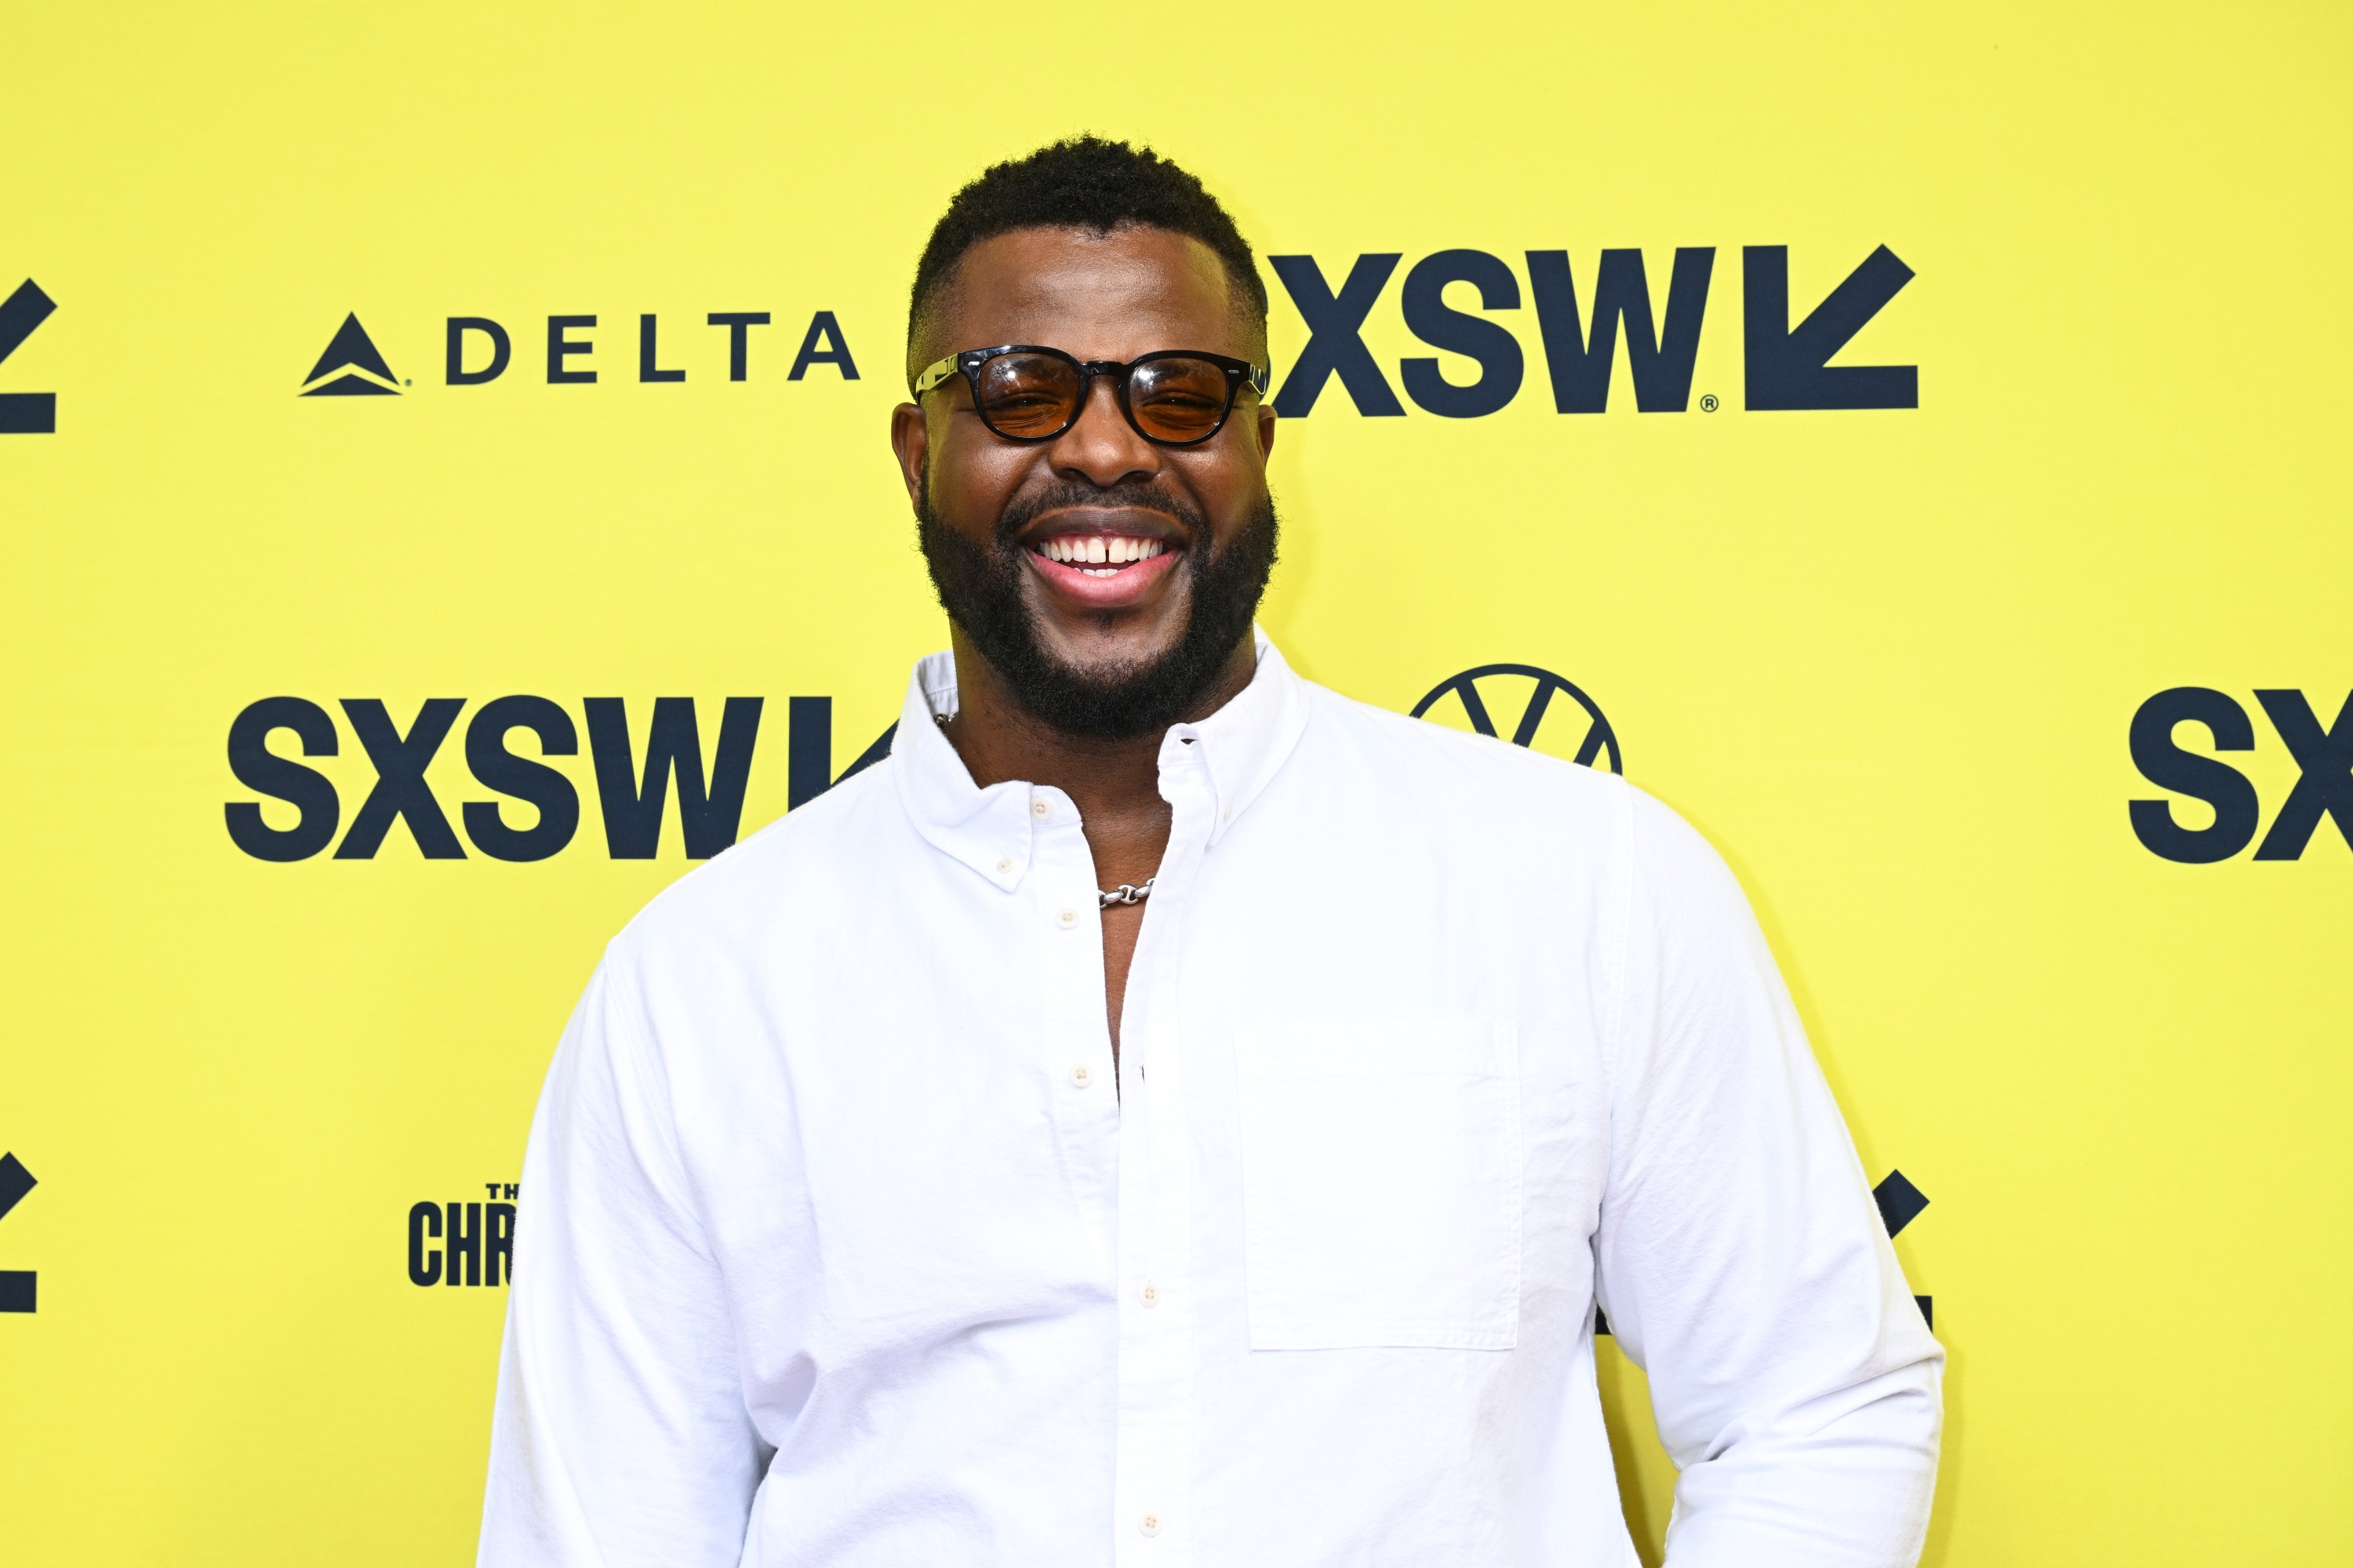 Winston Duke at the premiere of "The Fall Guy" as part of SXSW 2024 Conference and Festivals held at the Paramount Theatre on March 12, 2024 in Austin, Texas. (Photo by Gilbert Flores/SXSW Conference & Festivals via Getty Images)